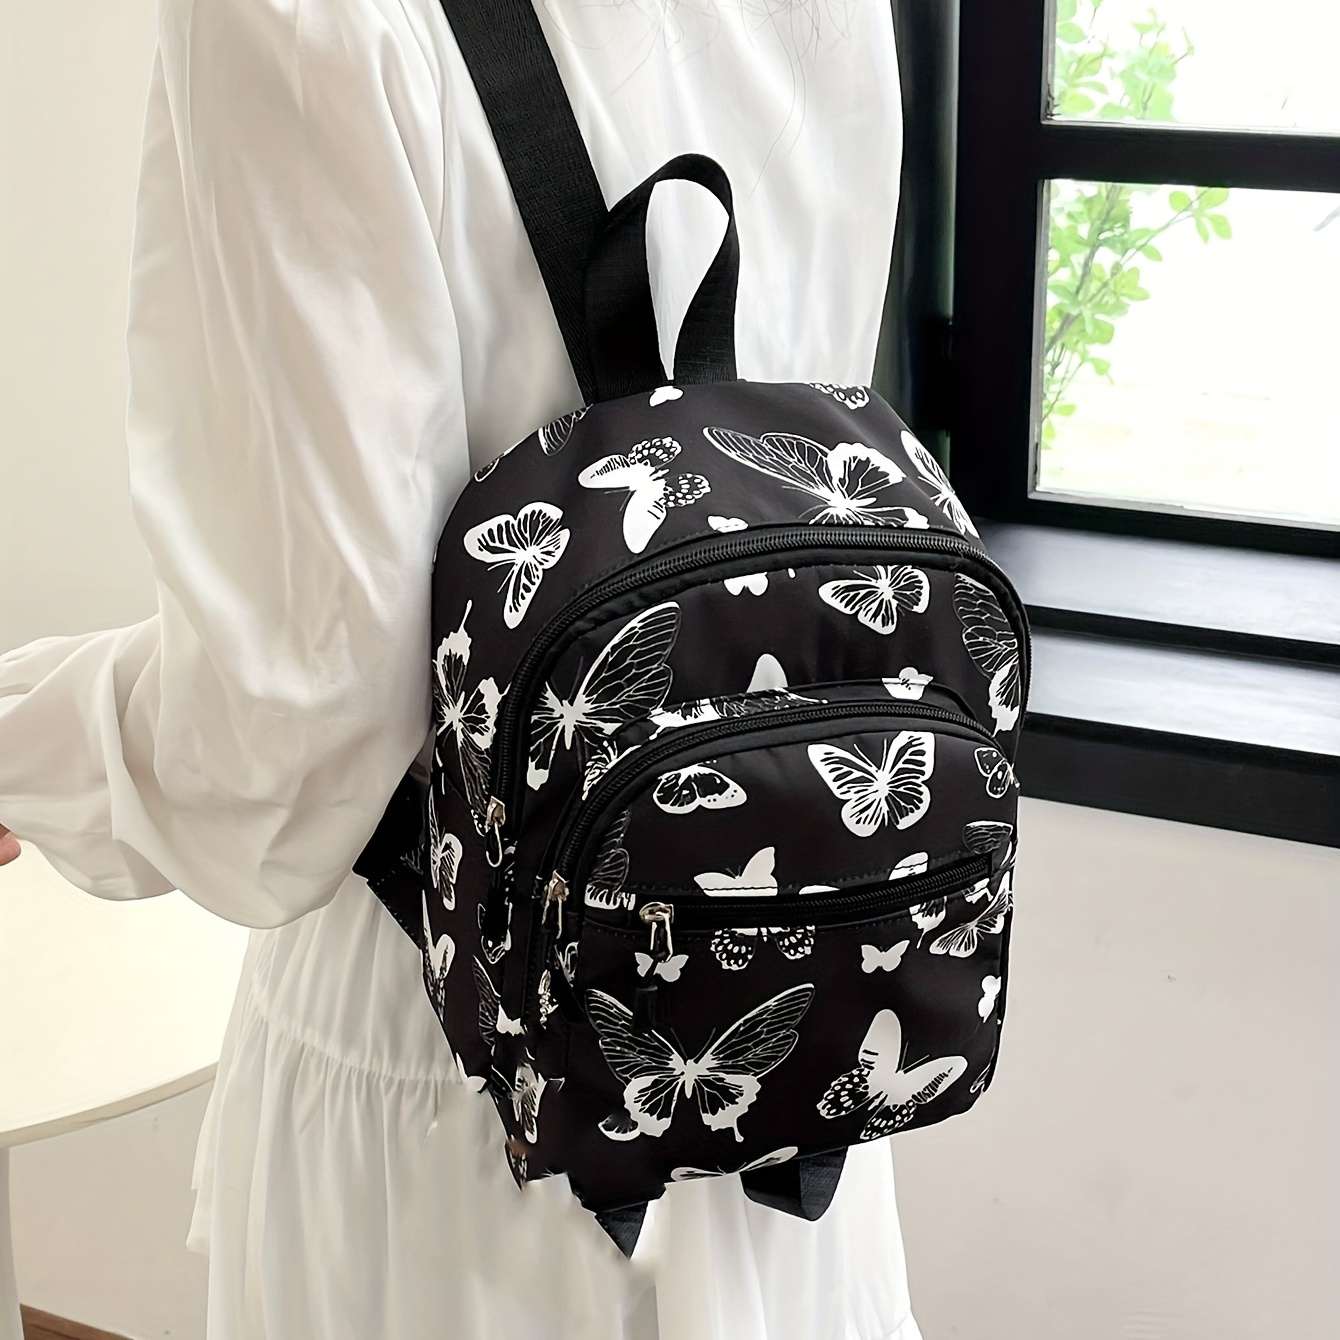 Mini Fashionable Clothes Shape Handbag With Butterfly Pattern